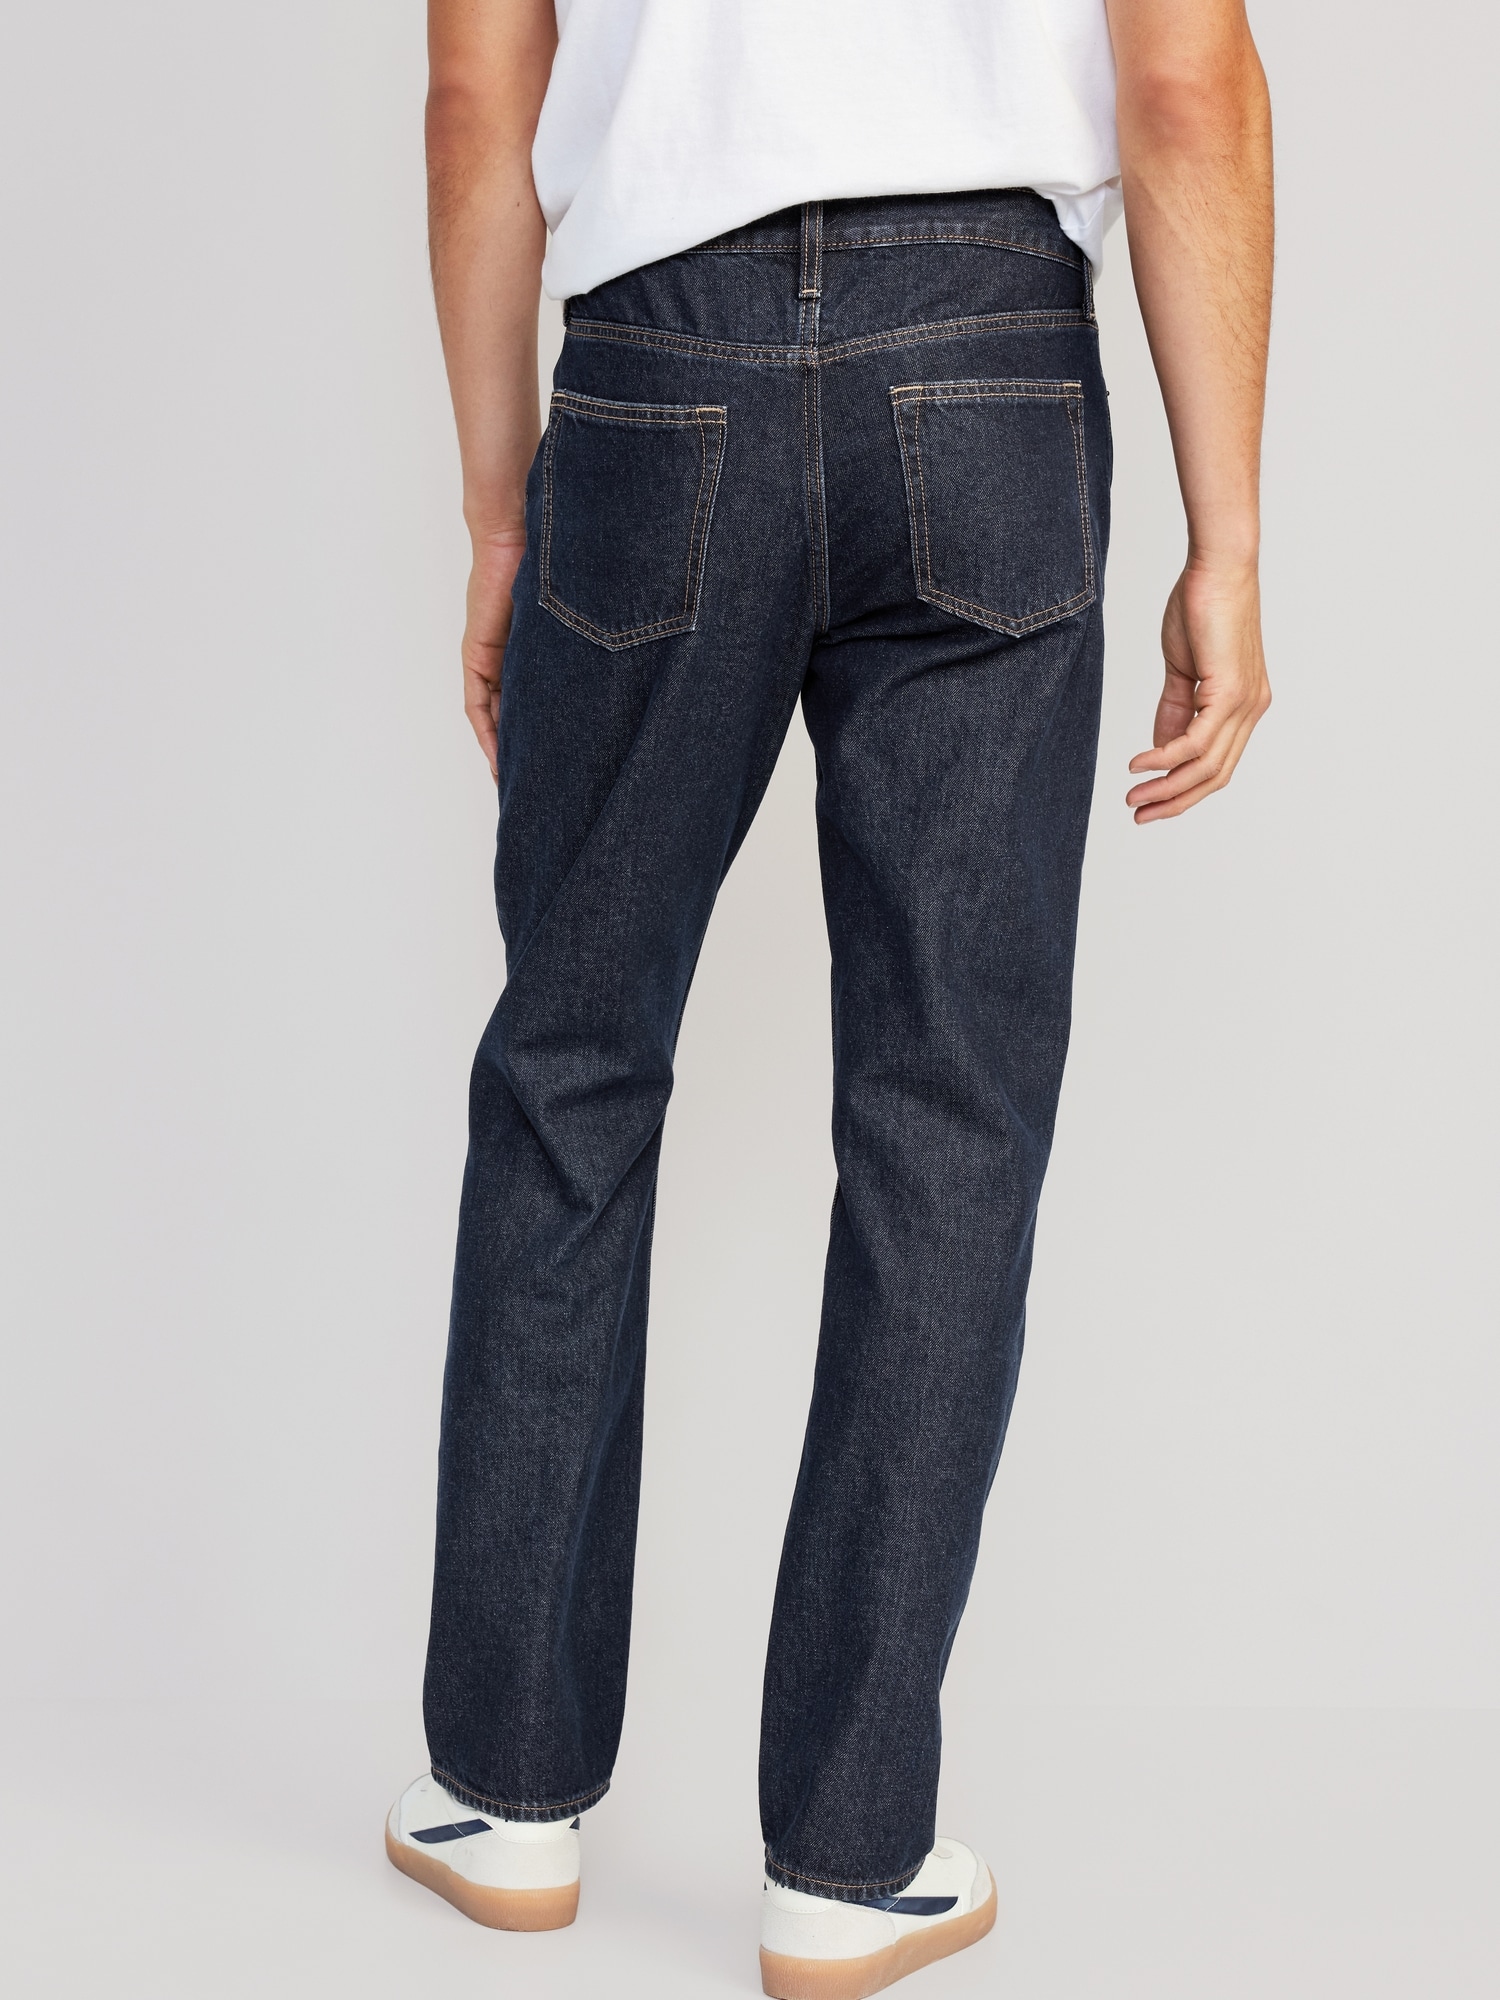 Wow Straight Non-Stretch Jeans for Men | Old Navy